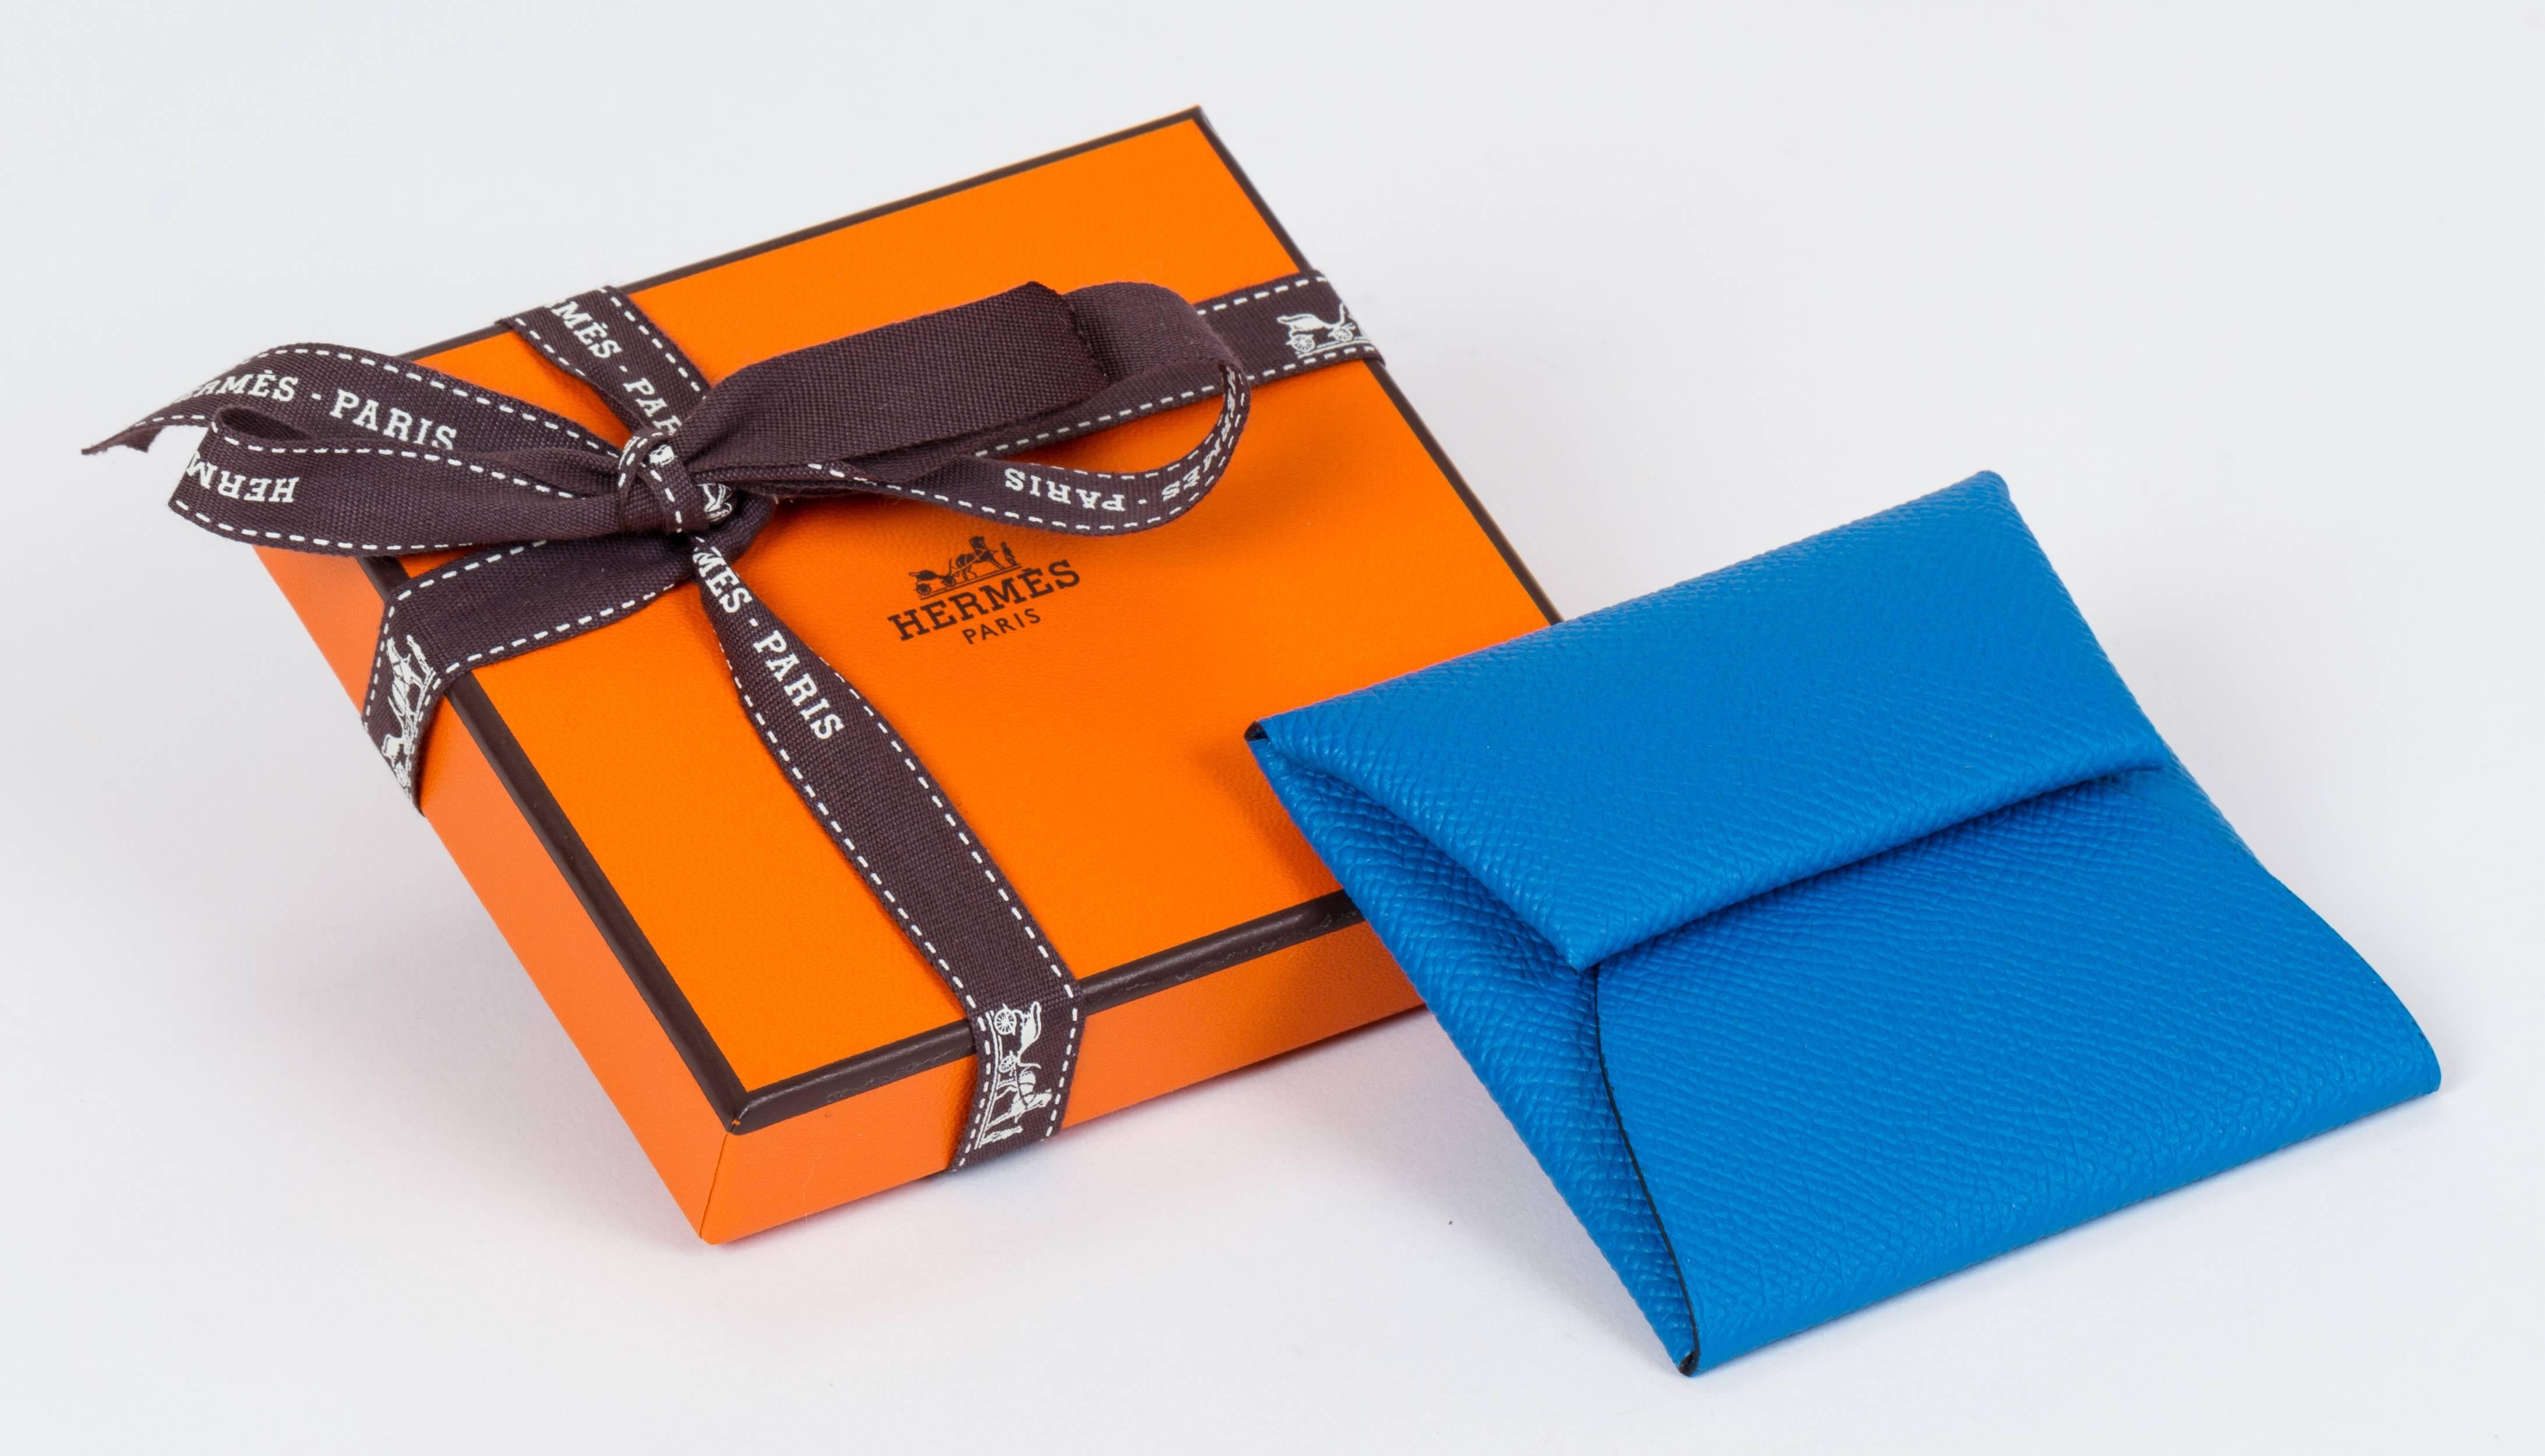 Hermès blue Zanzibar Epsom leather coin wallet. Brand new in box with ribbon and gift bag.